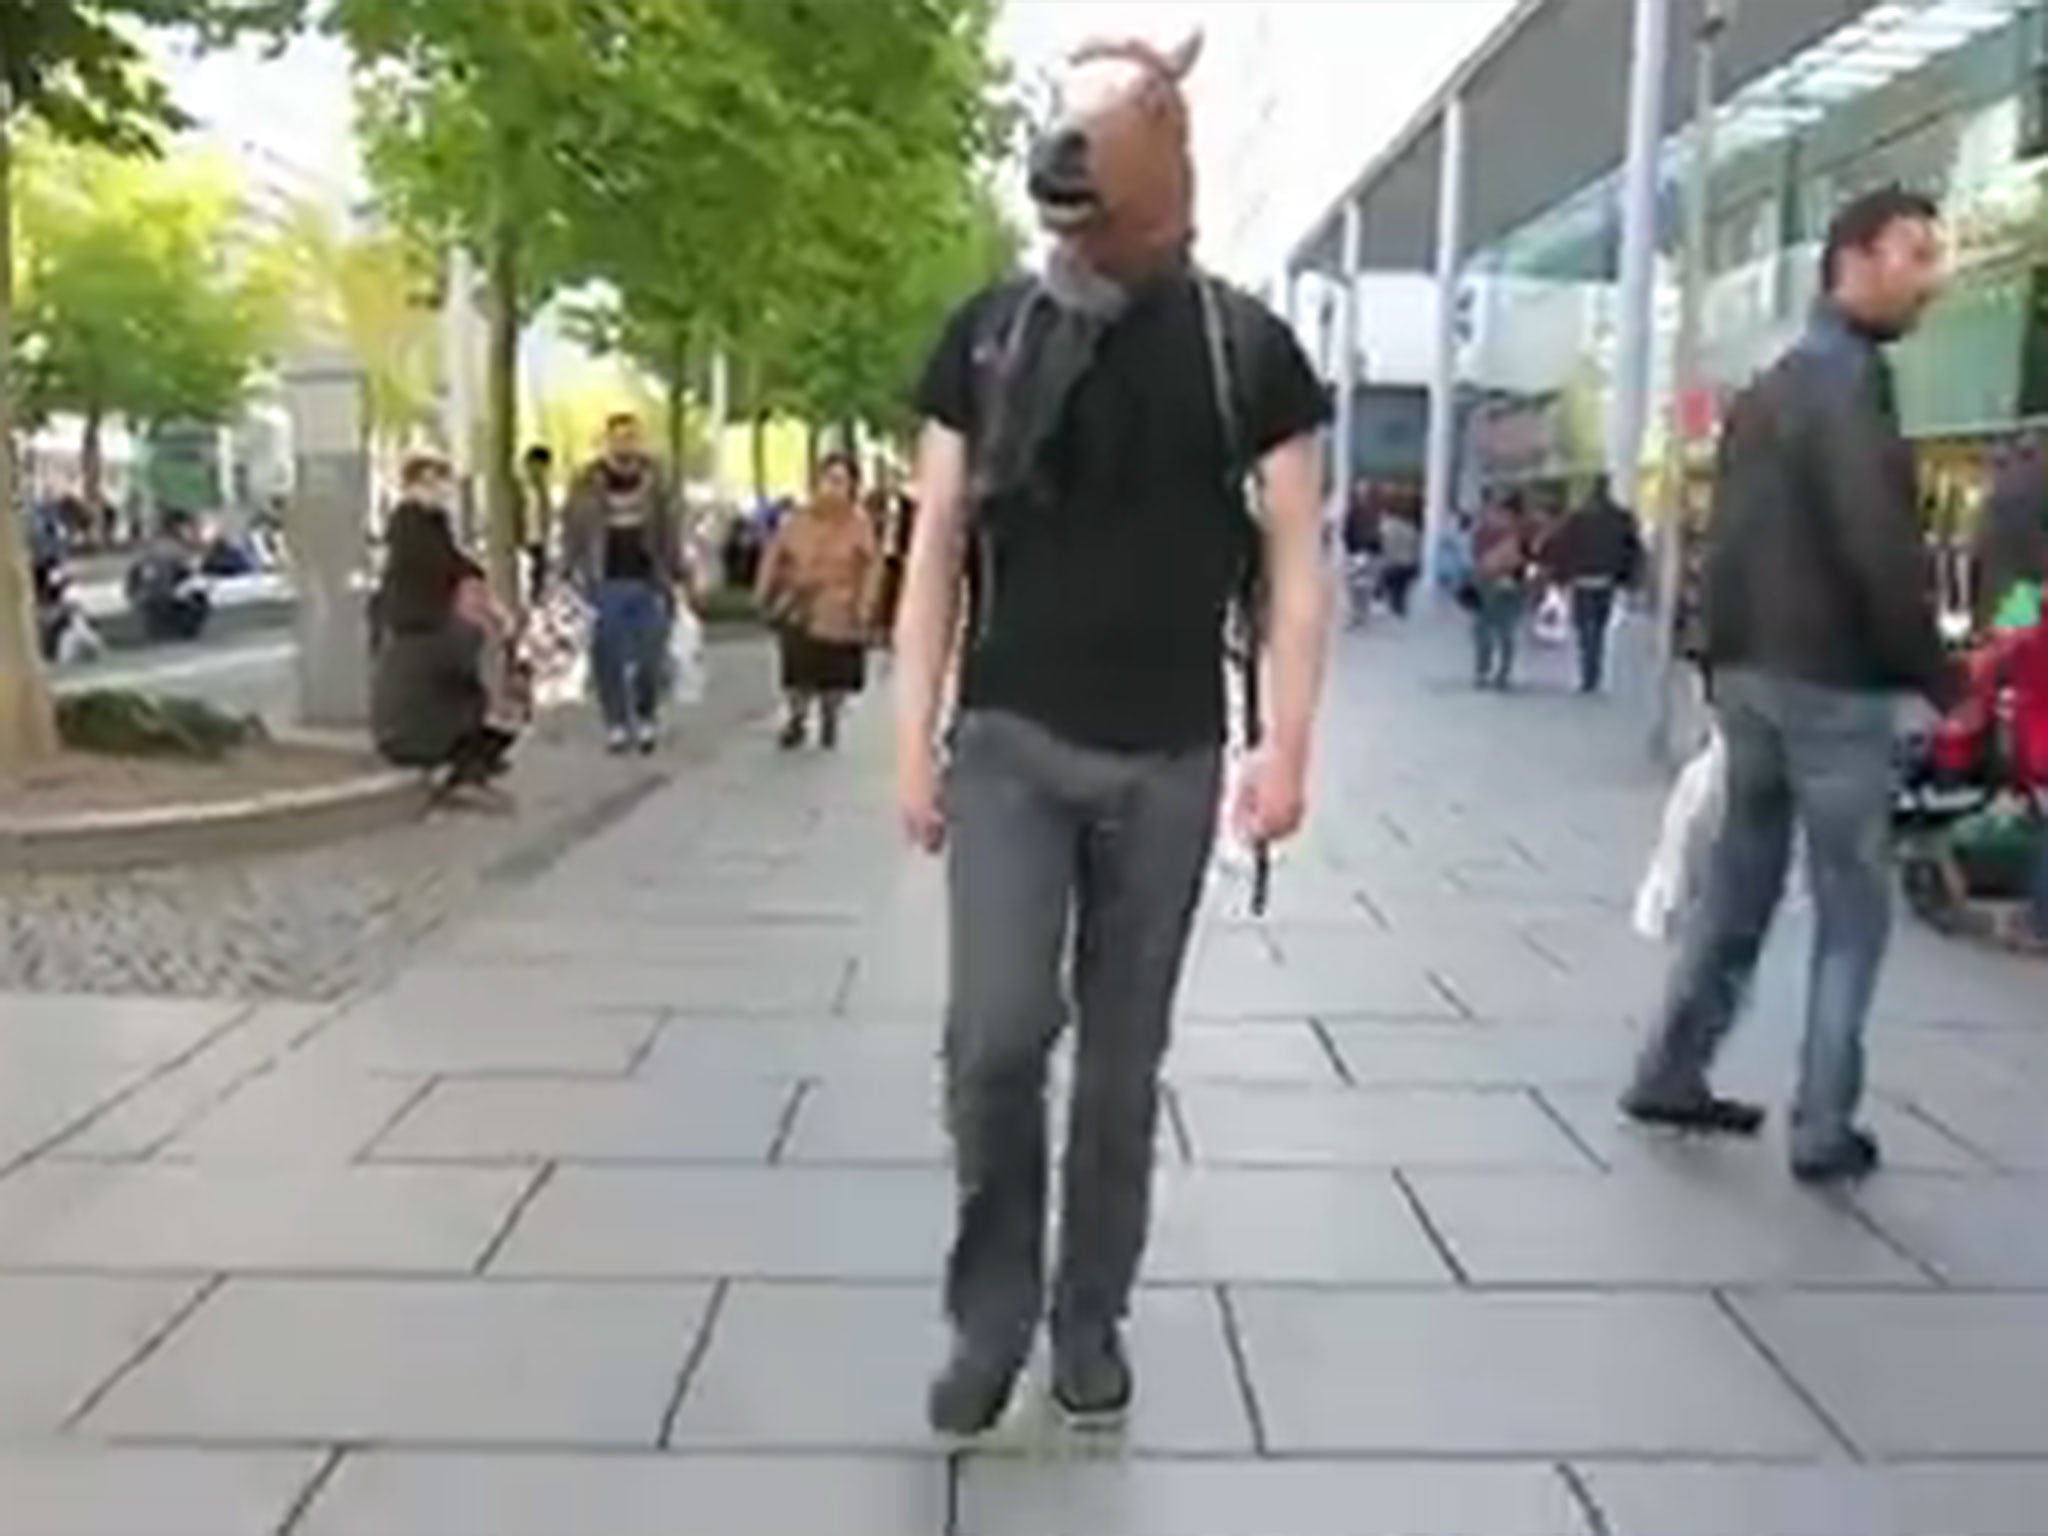 A man decided to see whether he would experience any "horsecalling' while walking around in Dresden.